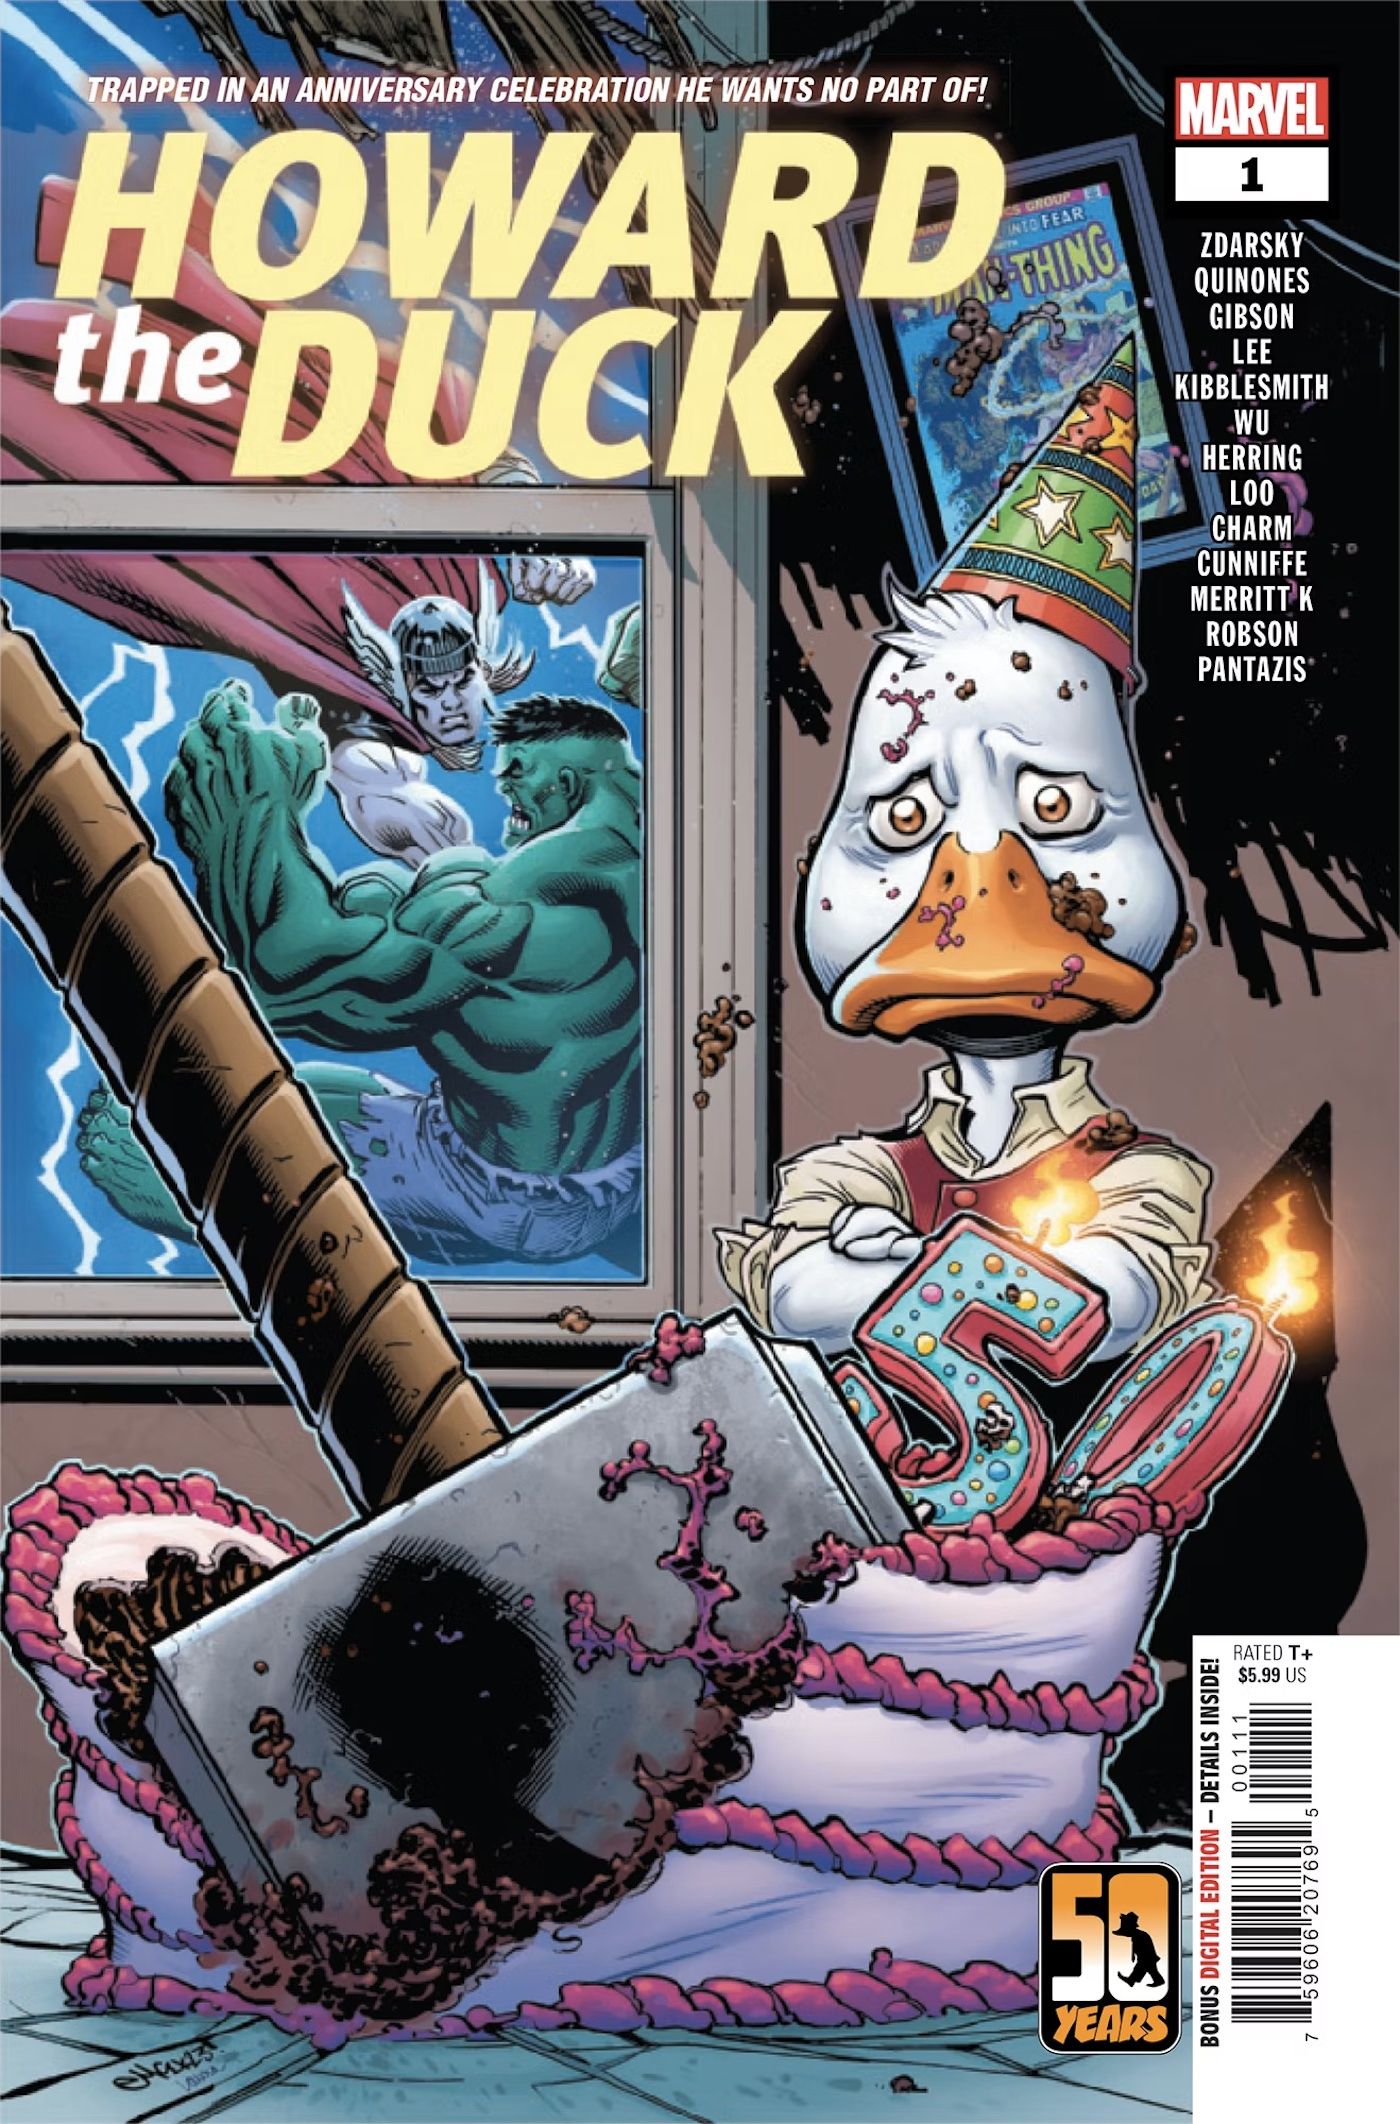 Howard the Duck 50th anniversary cover